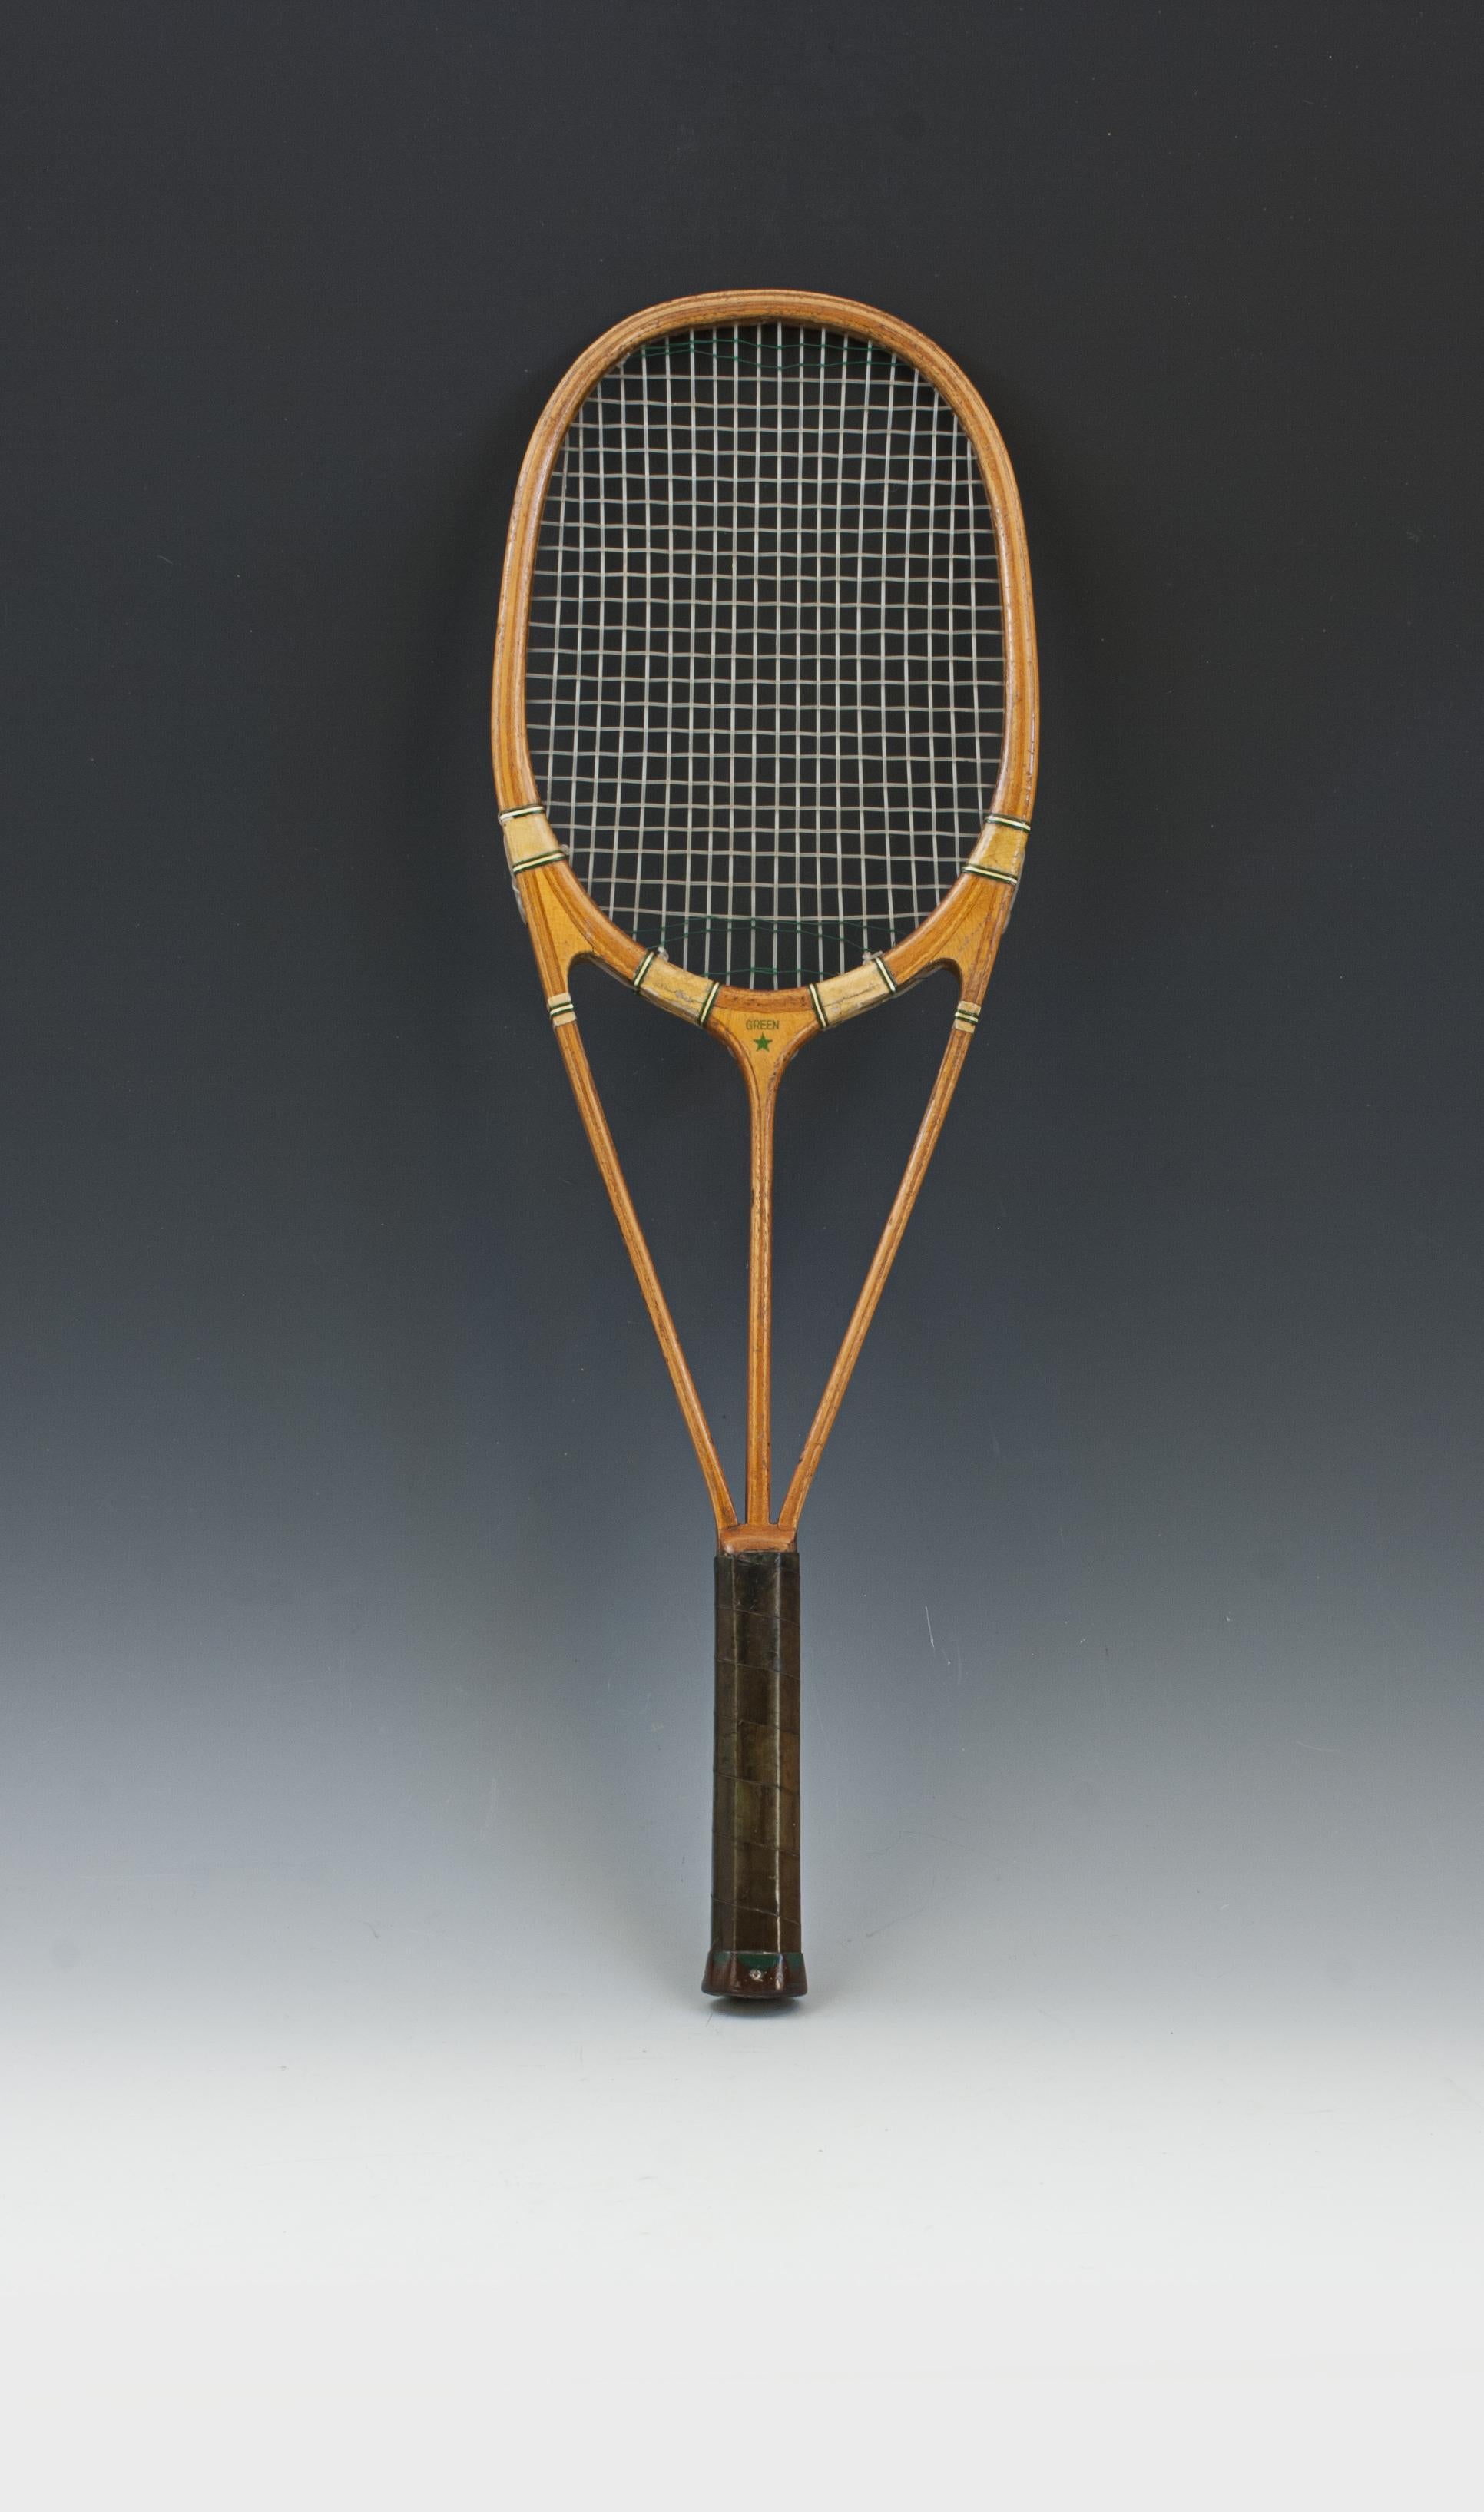 Hazell Streamline Tennis Racket, Green Star.
A good triple branch Green Star Streamline tennis racket made by Hazells' of 111-113 Mare Street, London E 8. The racket is in good condition, all transfers are bright in colour with slight rubbing to